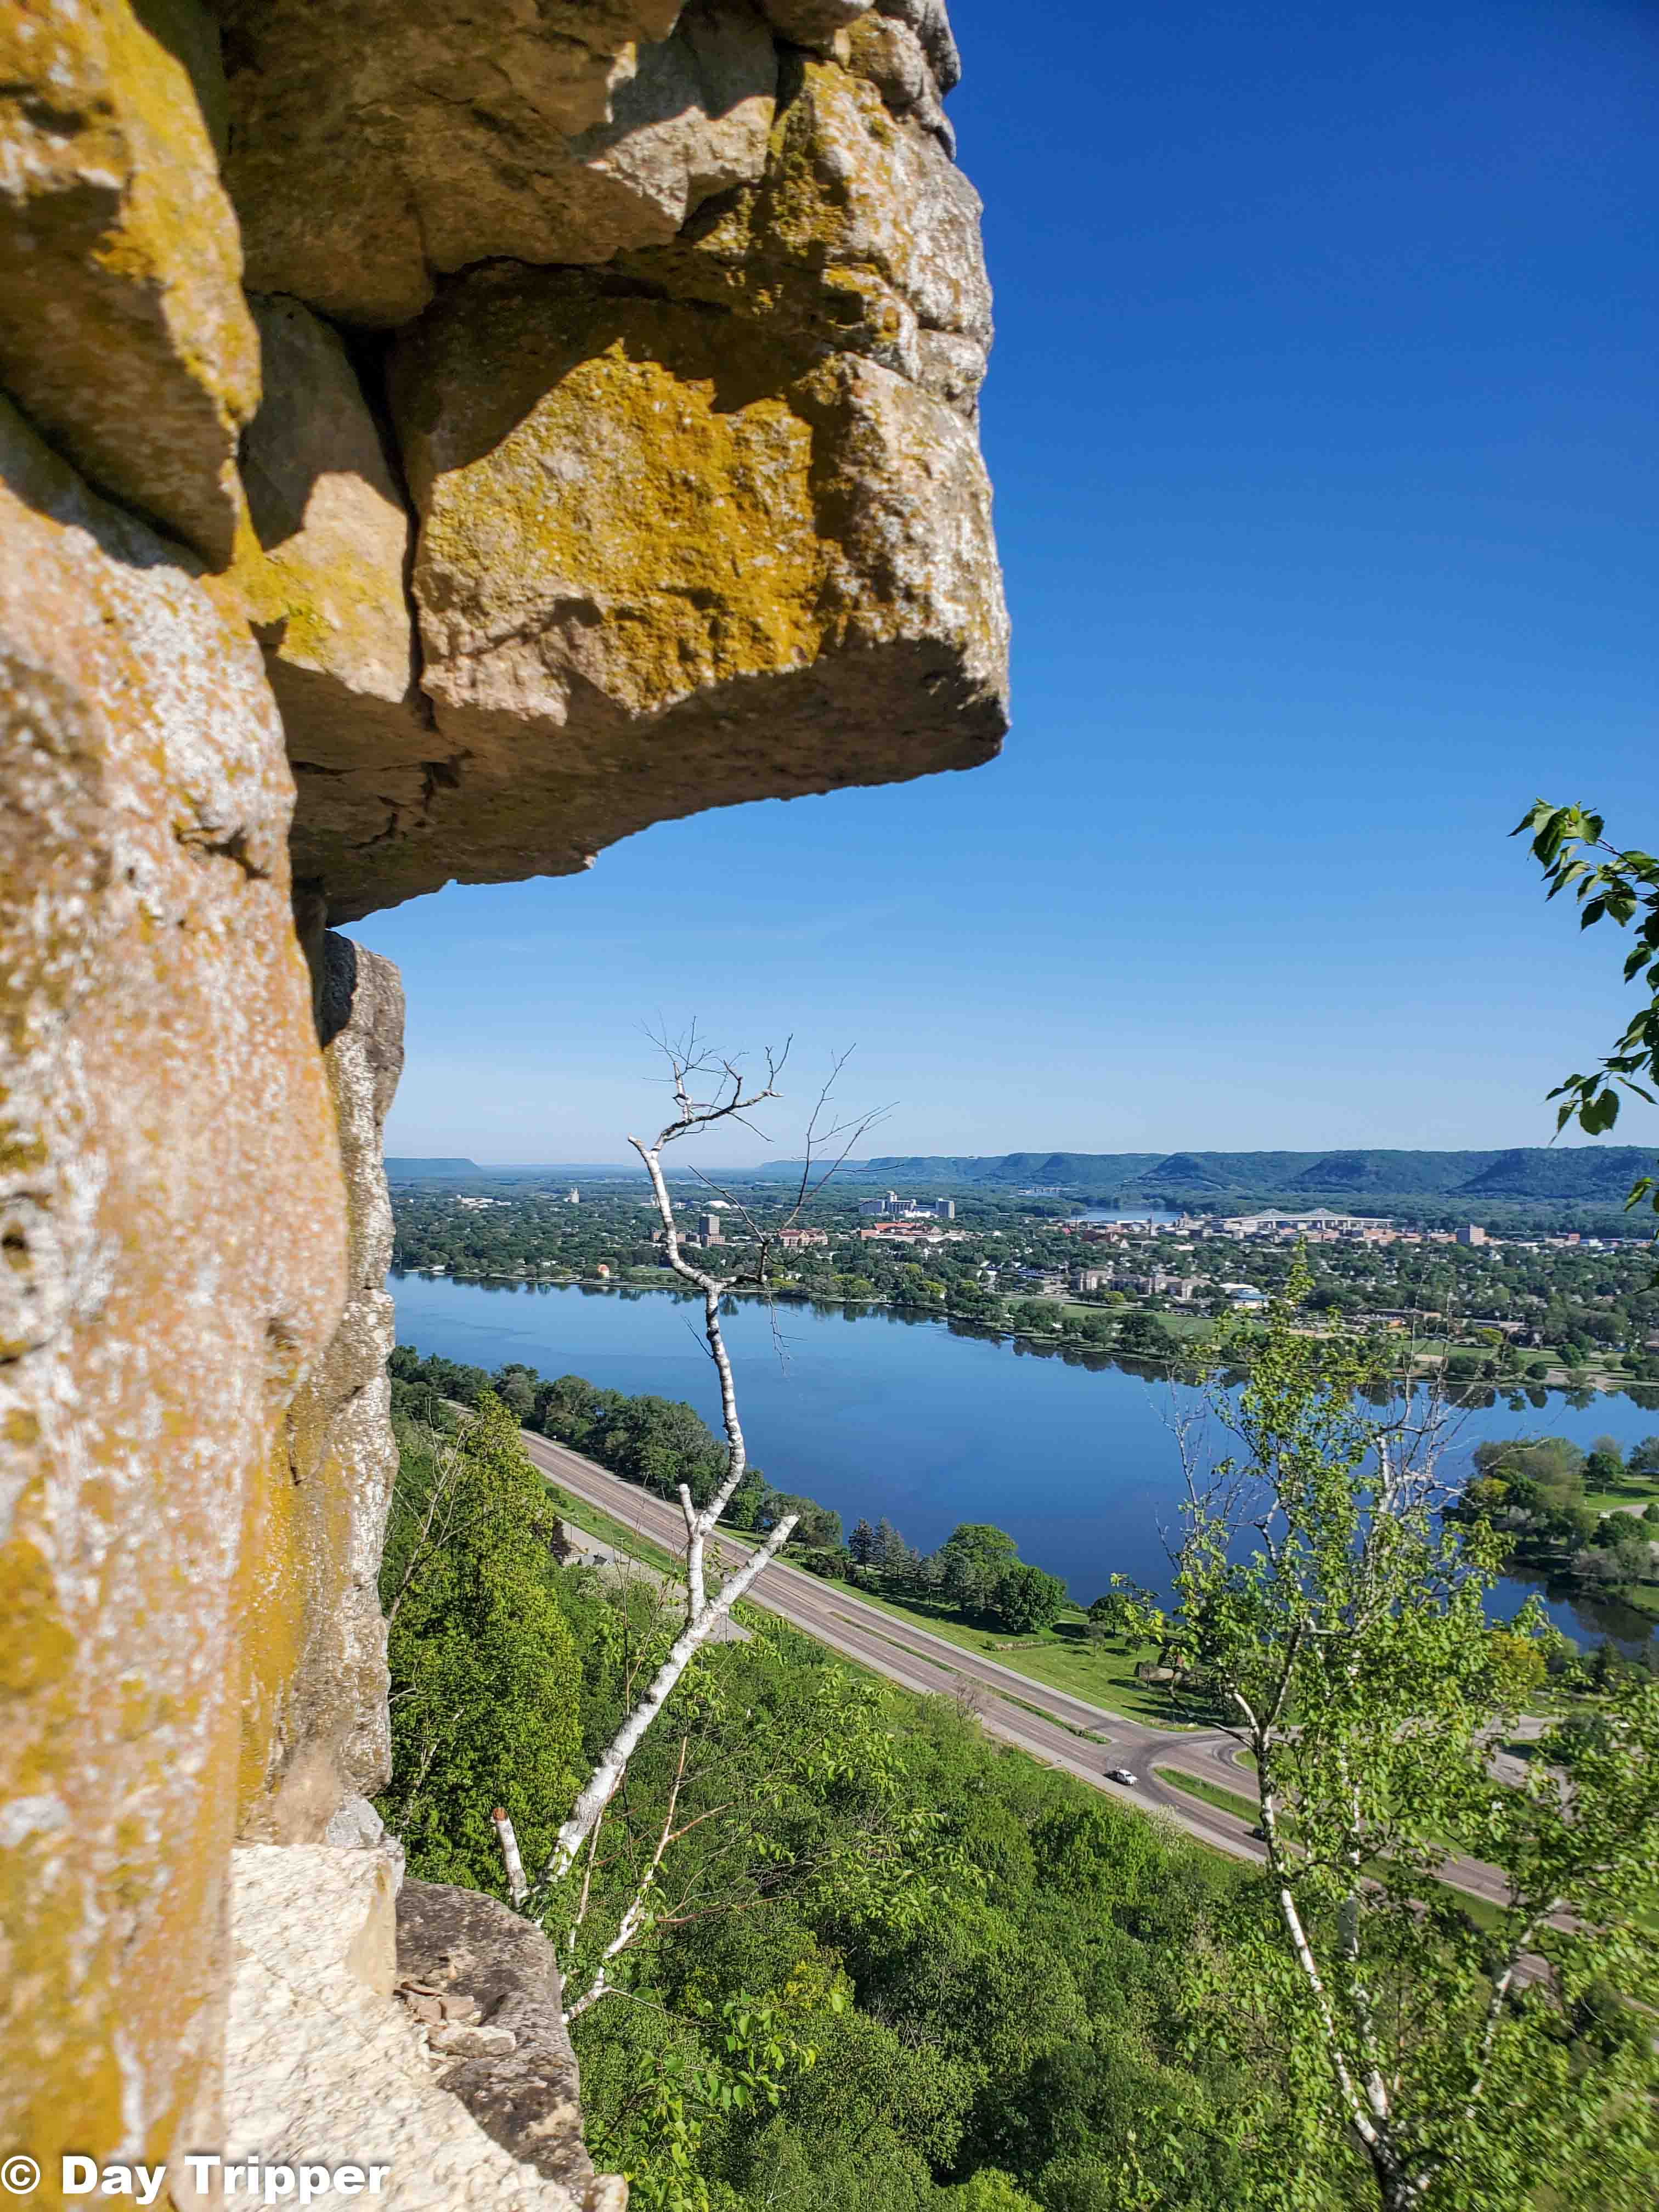 View of Winona from Sugar Loaf Bluff